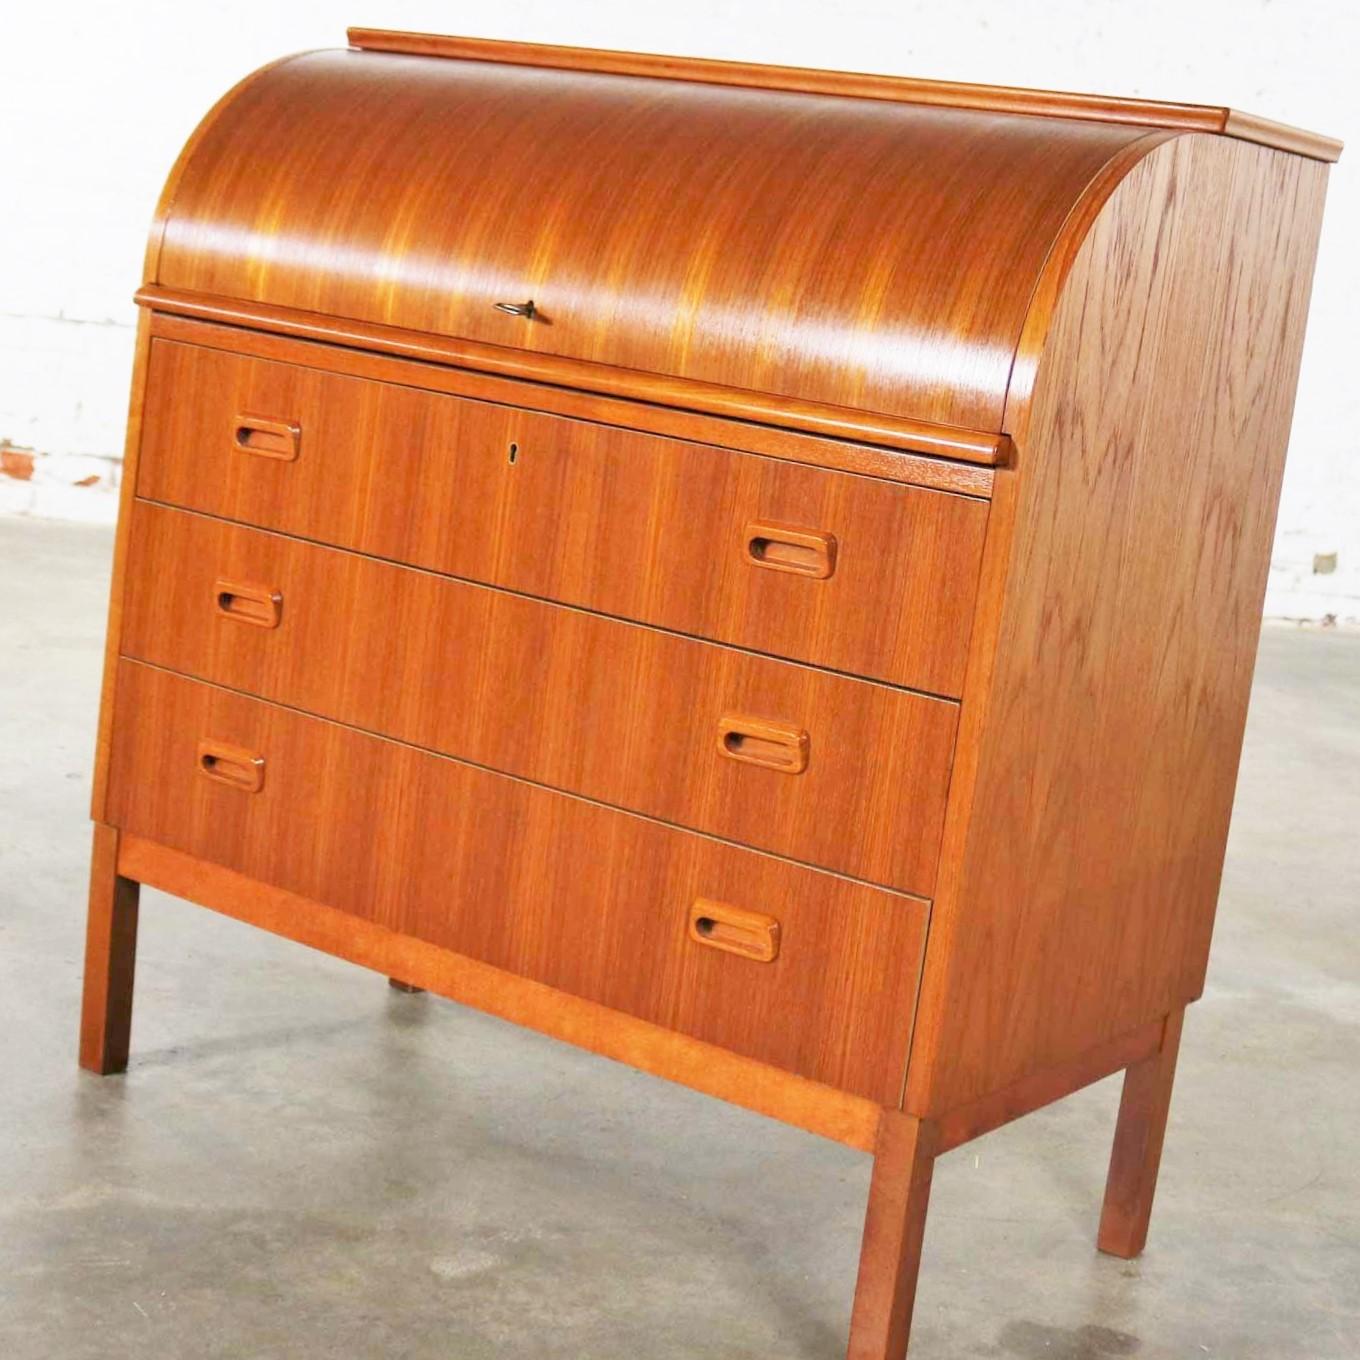 Handsome teak Scandinavian Modern rolltop writing desk or secretary which is attributed to Egon Ostergaard. It is marked Made in Sweden and in wonderful vintage condition and no outstanding flaws we have detected only small age appropriate